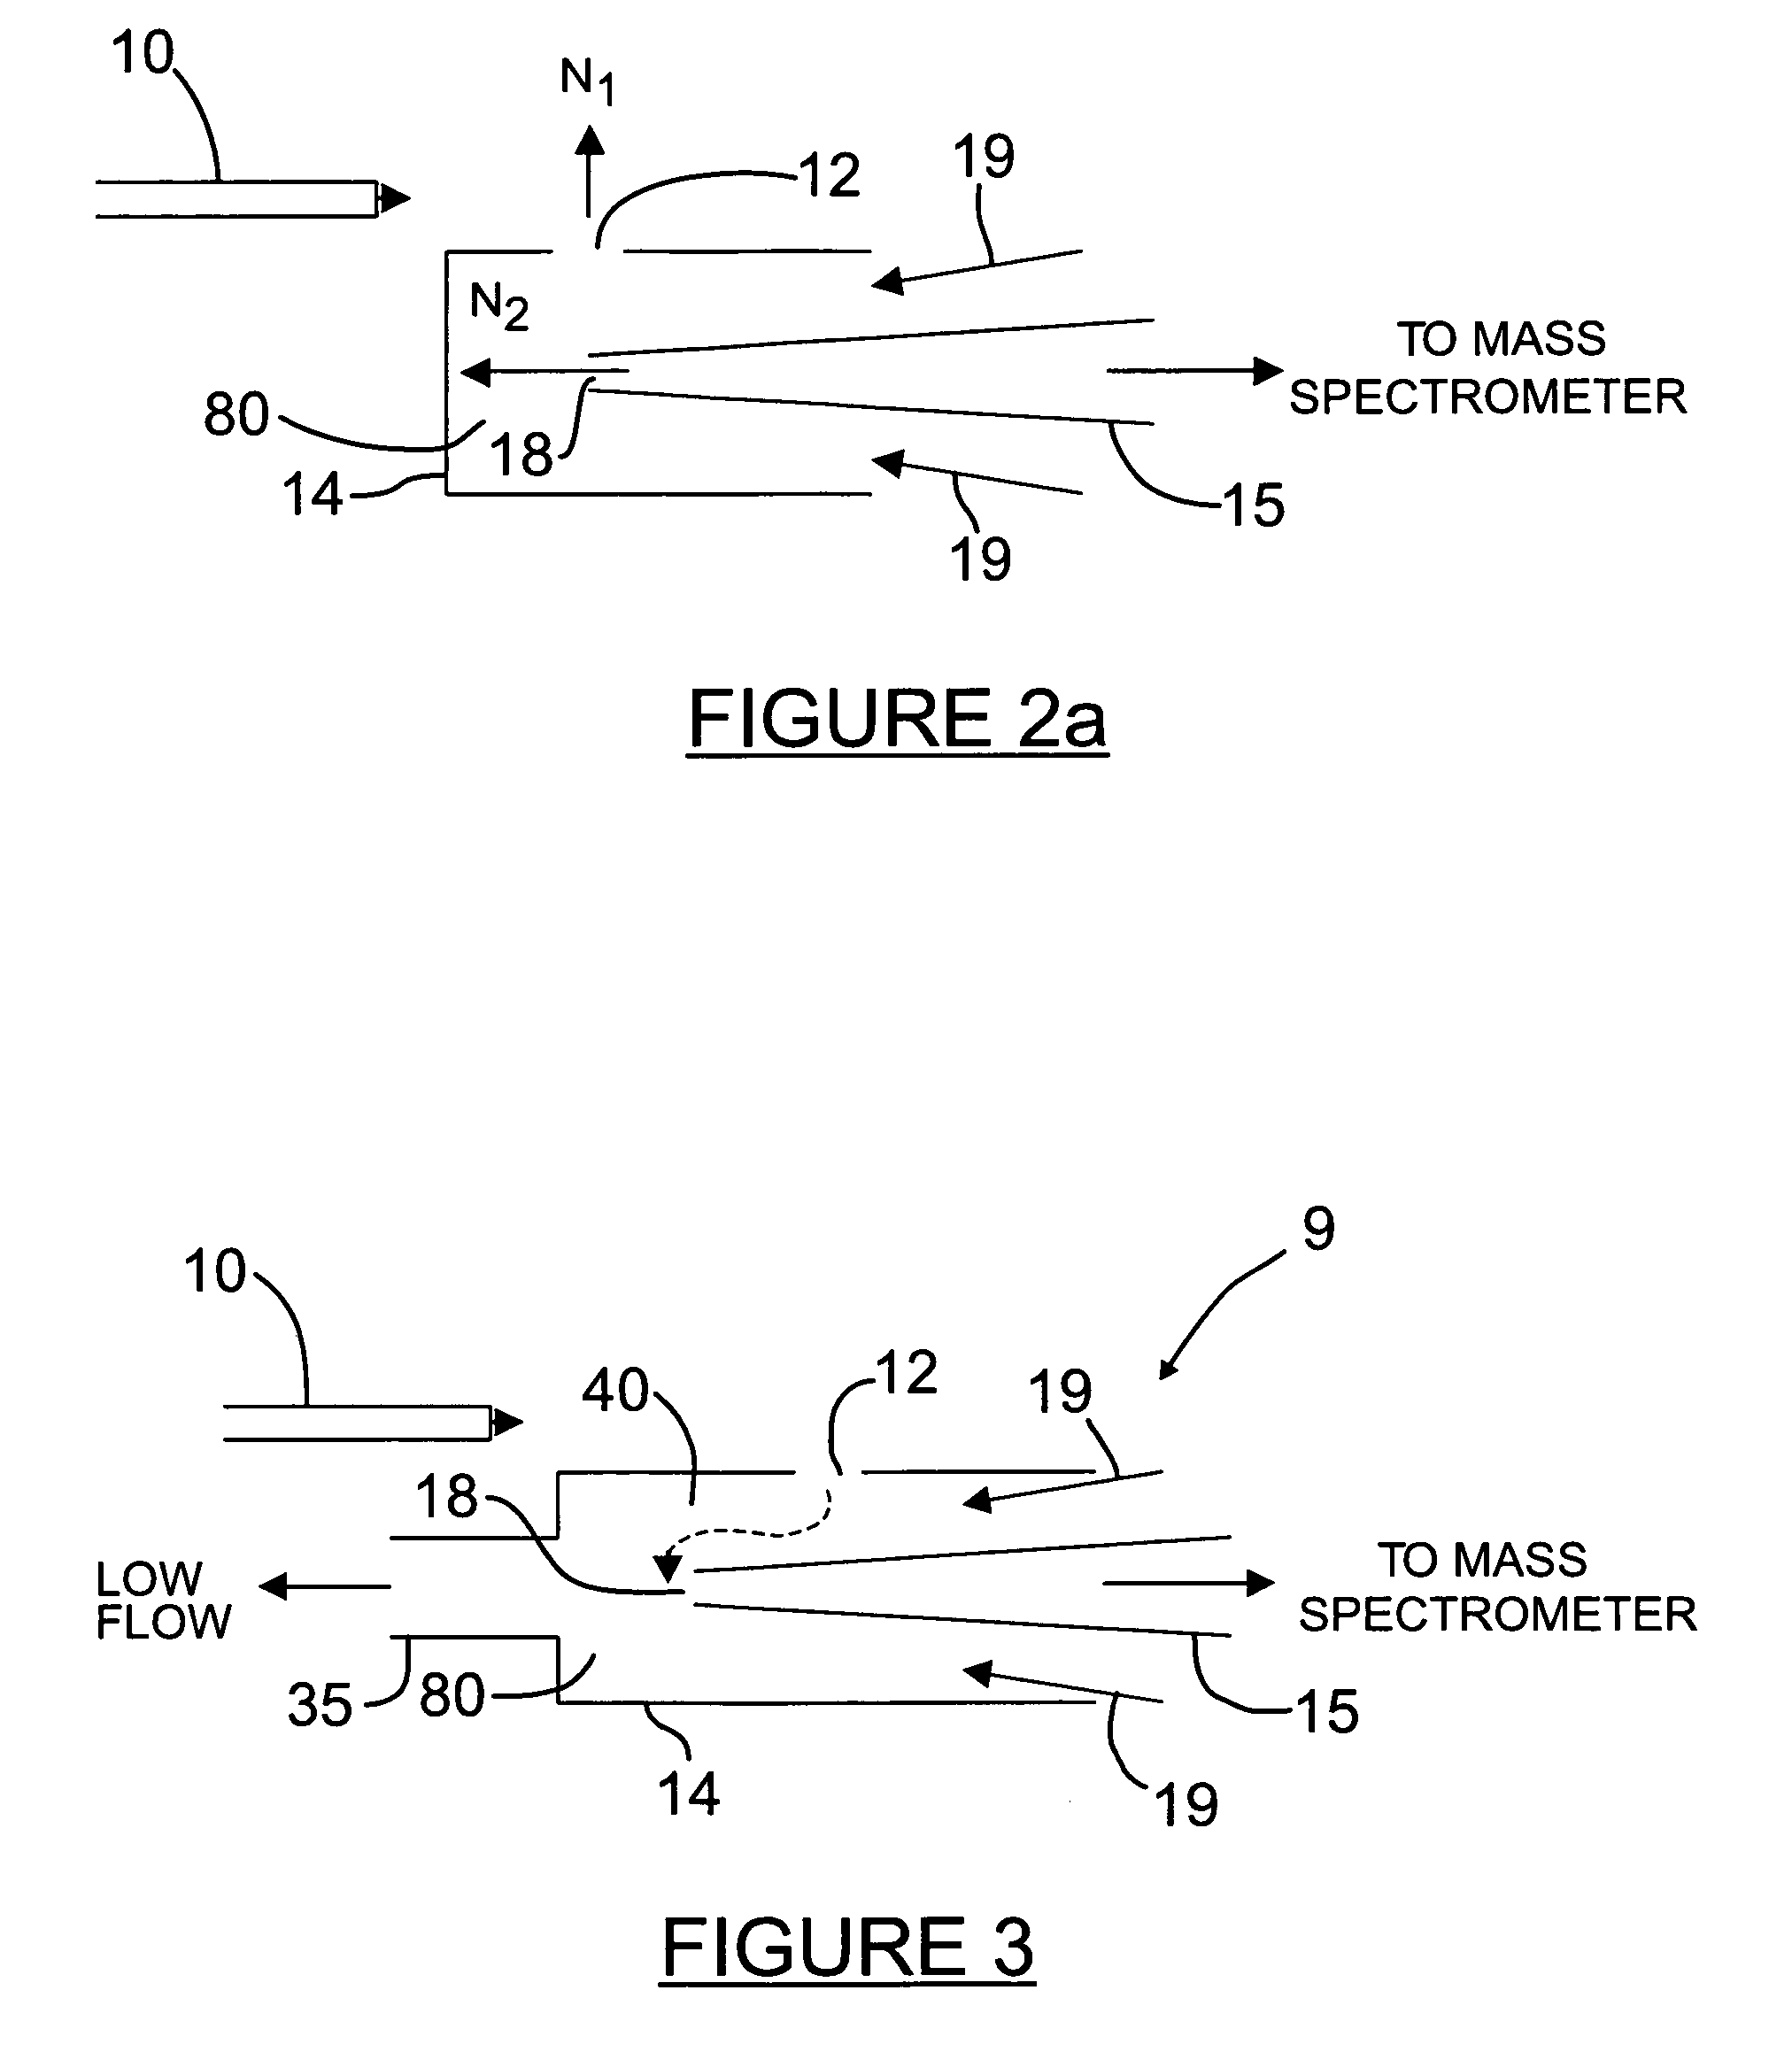 High sensitivity mass spectrometer interface for multiple ion sources